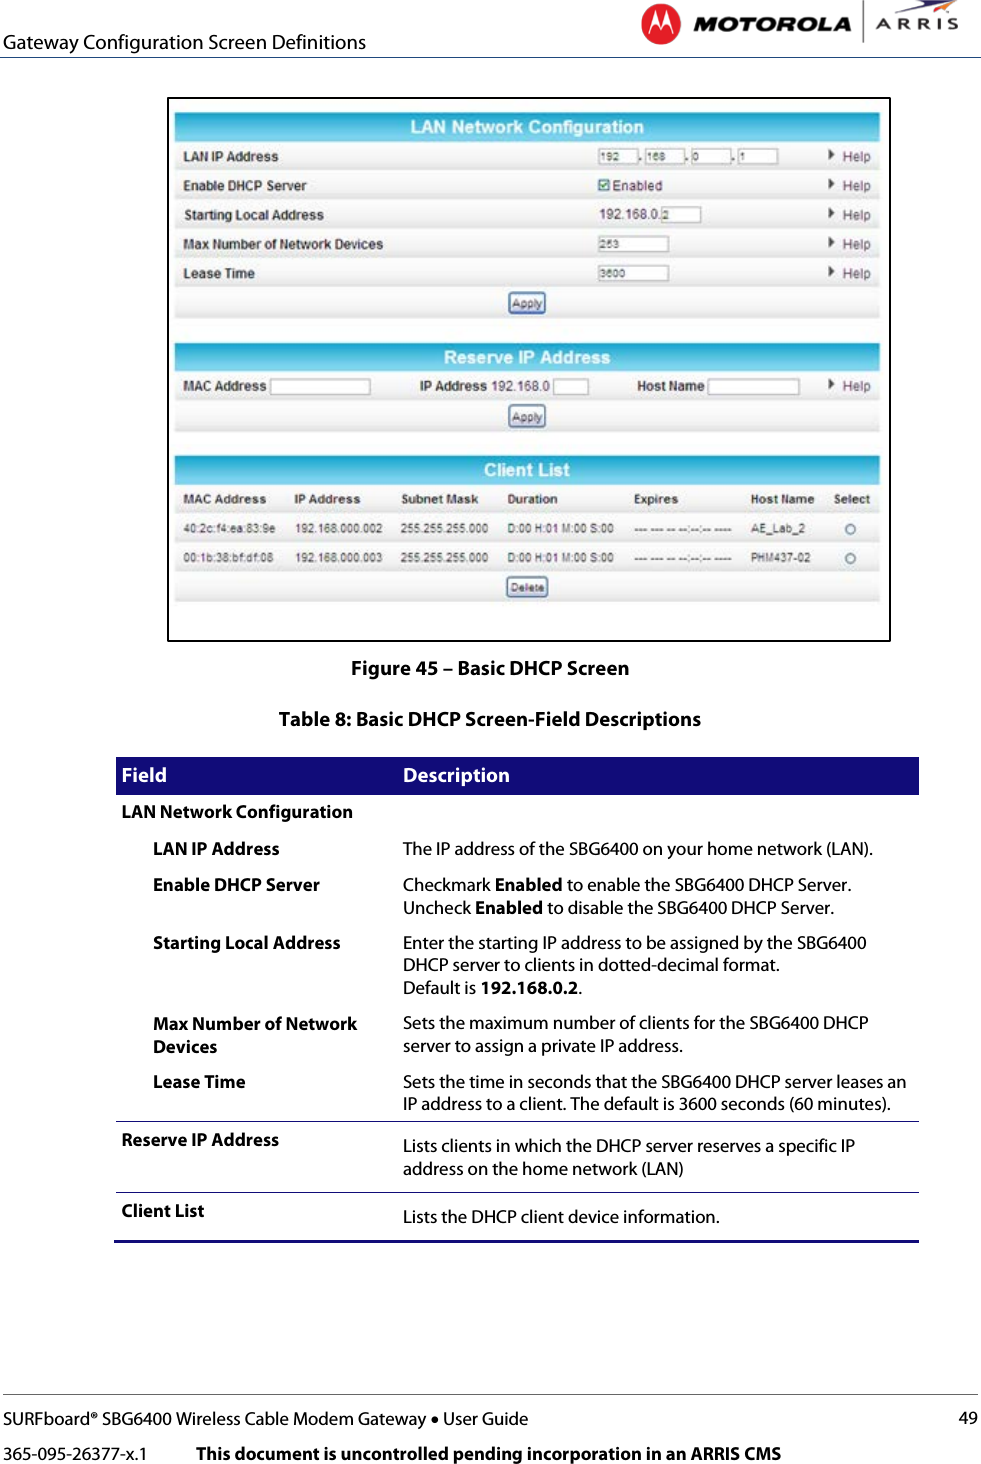 Gateway Configuration Screen Definitions   SURFboard® SBG6400 Wireless Cable Modem Gateway • User Guide 49 365-095-26377-x.1            This document is uncontrolled pending incorporation in an ARRIS CMS   Figure 45 – Basic DHCP Screen Table 8: Basic DHCP Screen-Field Descriptions Field Description LAN Network Configuration  LAN IP Address The IP address of the SBG6400 on your home network (LAN). Enable DHCP Server Checkmark Enabled to enable the SBG6400 DHCP Server. Uncheck Enabled to disable the SBG6400 DHCP Server. Starting Local Address Enter the starting IP address to be assigned by the SBG6400 DHCP server to clients in dotted-decimal format. Default is 192.168.0.2. Max Number of Network Devices Sets the maximum number of clients for the SBG6400 DHCP server to assign a private IP address. Lease Time Sets the time in seconds that the SBG6400 DHCP server leases an IP address to a client. The default is 3600 seconds (60 minutes). Reserve IP Address Lists clients in which the DHCP server reserves a specific IP address on the home network (LAN) Client List Lists the DHCP client device information. 